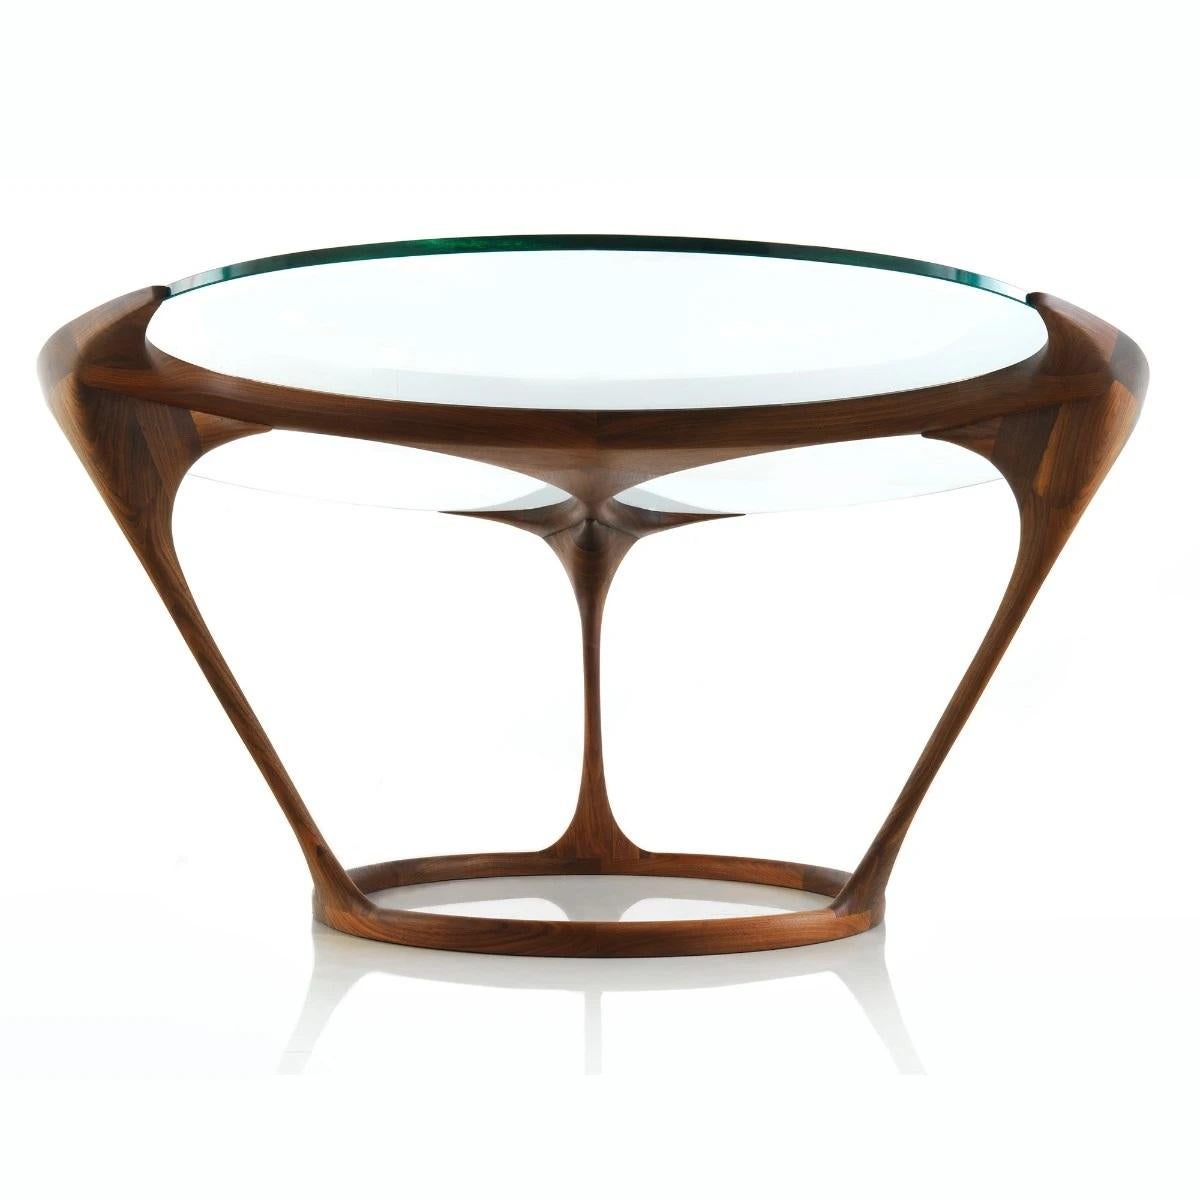 Spanish Contemporary Round Dining Table with Glass Top